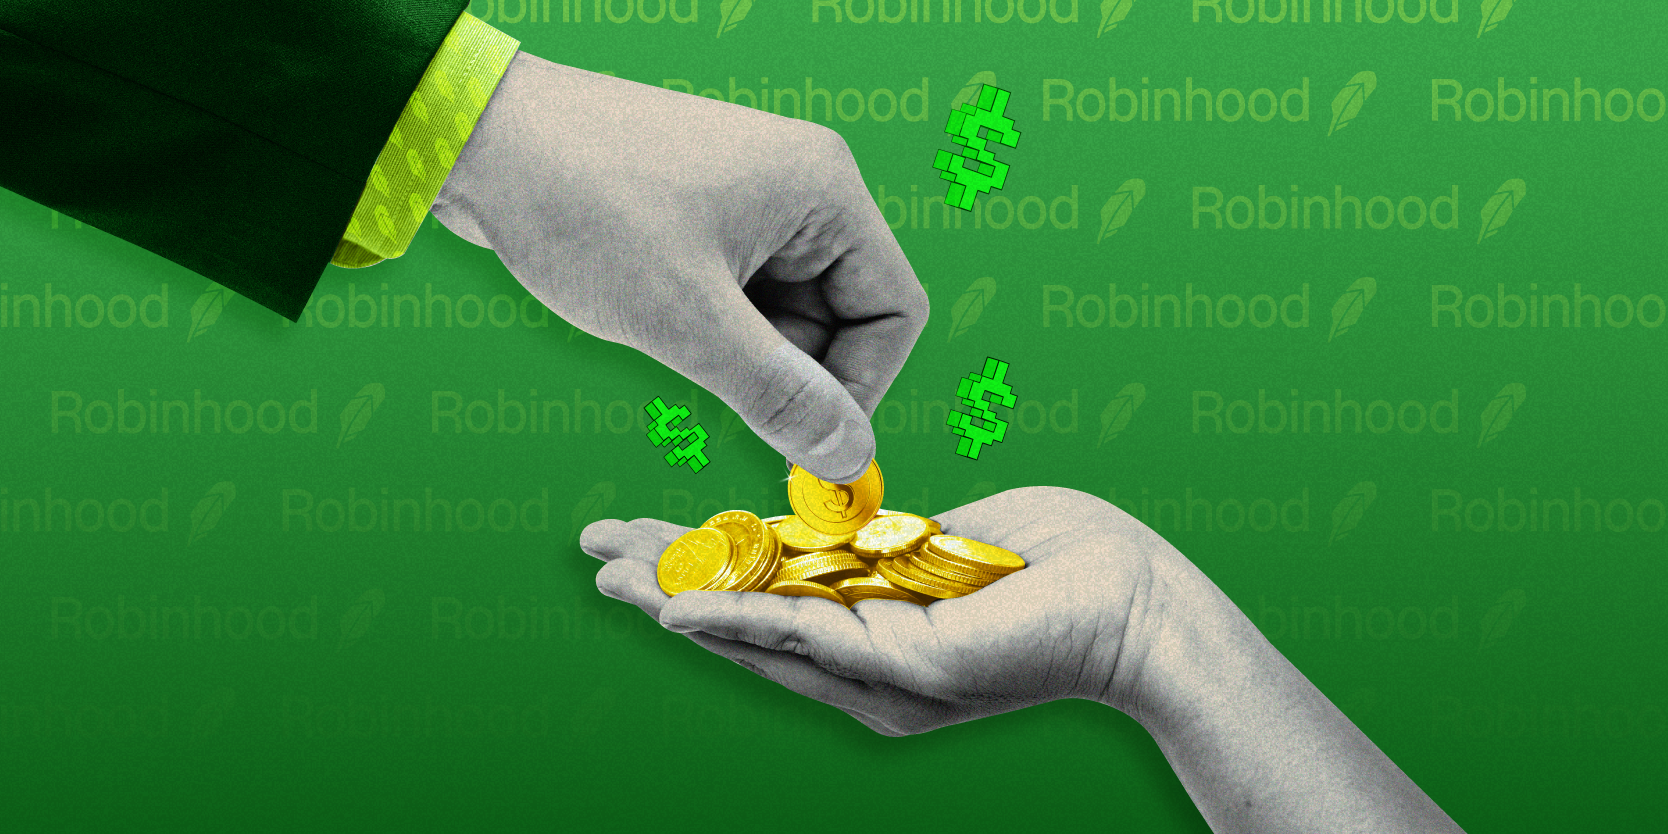 Arm in a green suit, with Robinhood symbols collecting fees from another hand